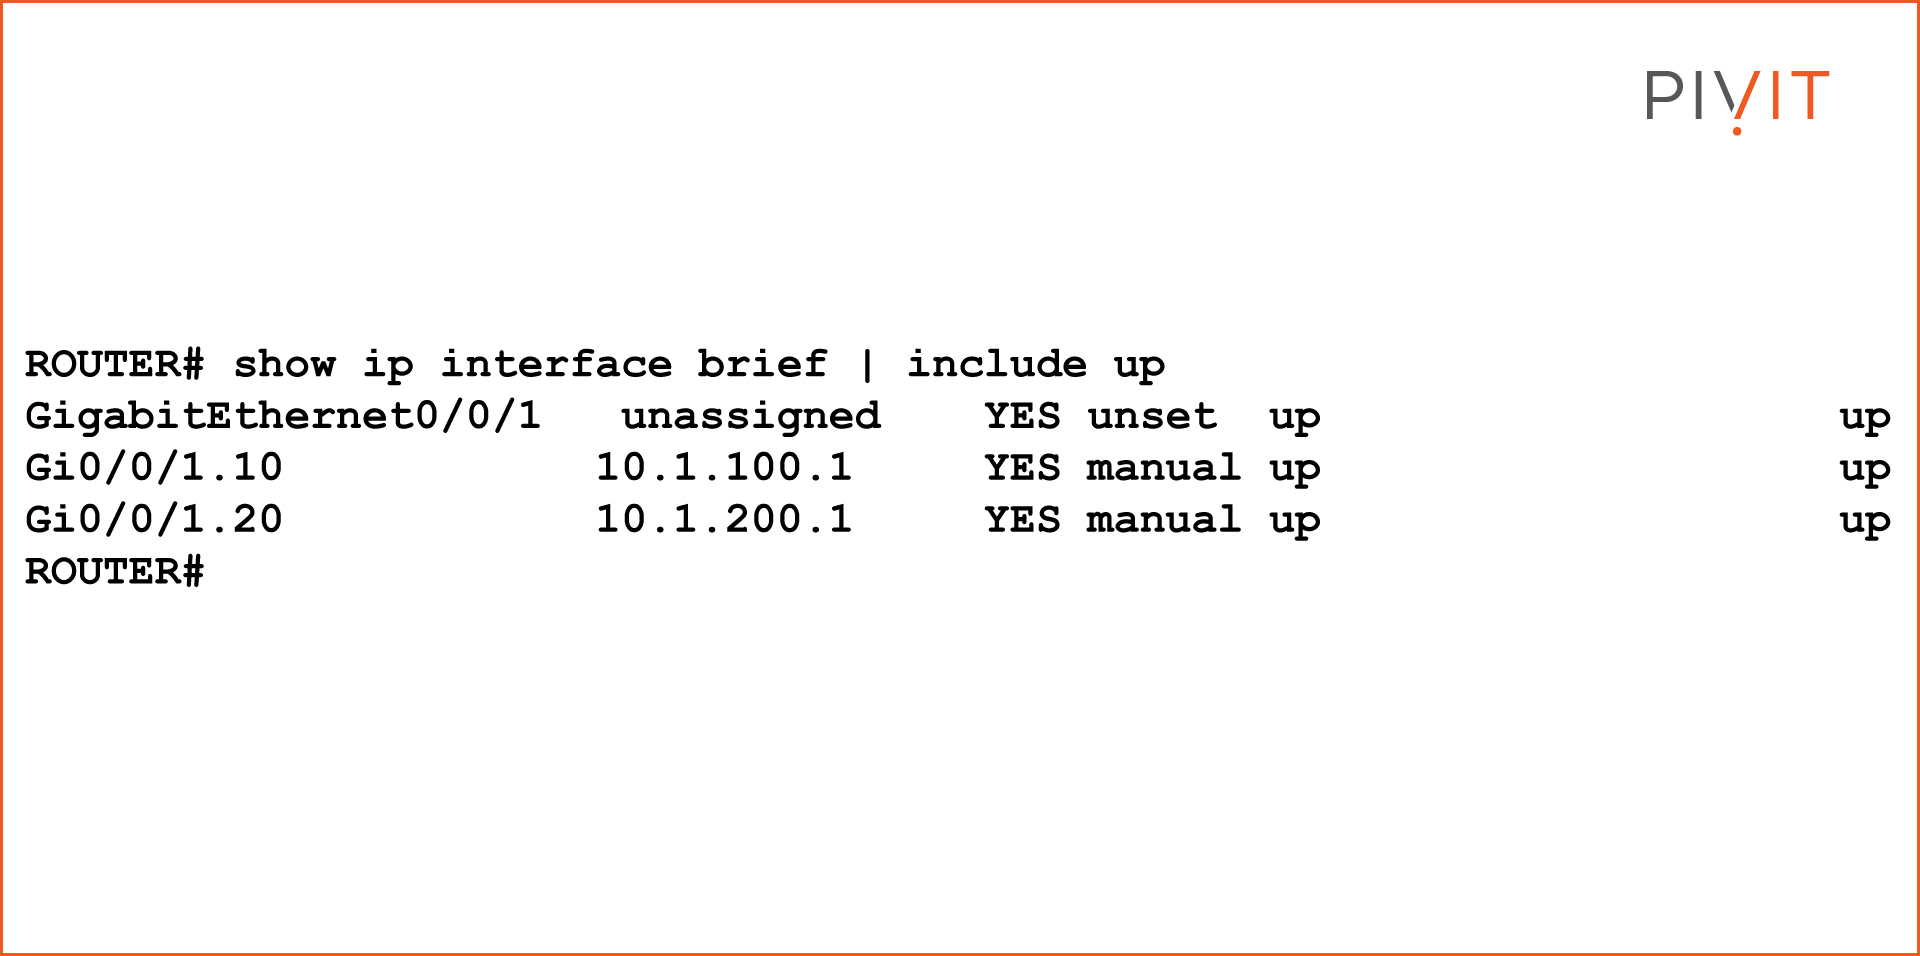 Verify Subinterface IP Addresses and Status commands and response